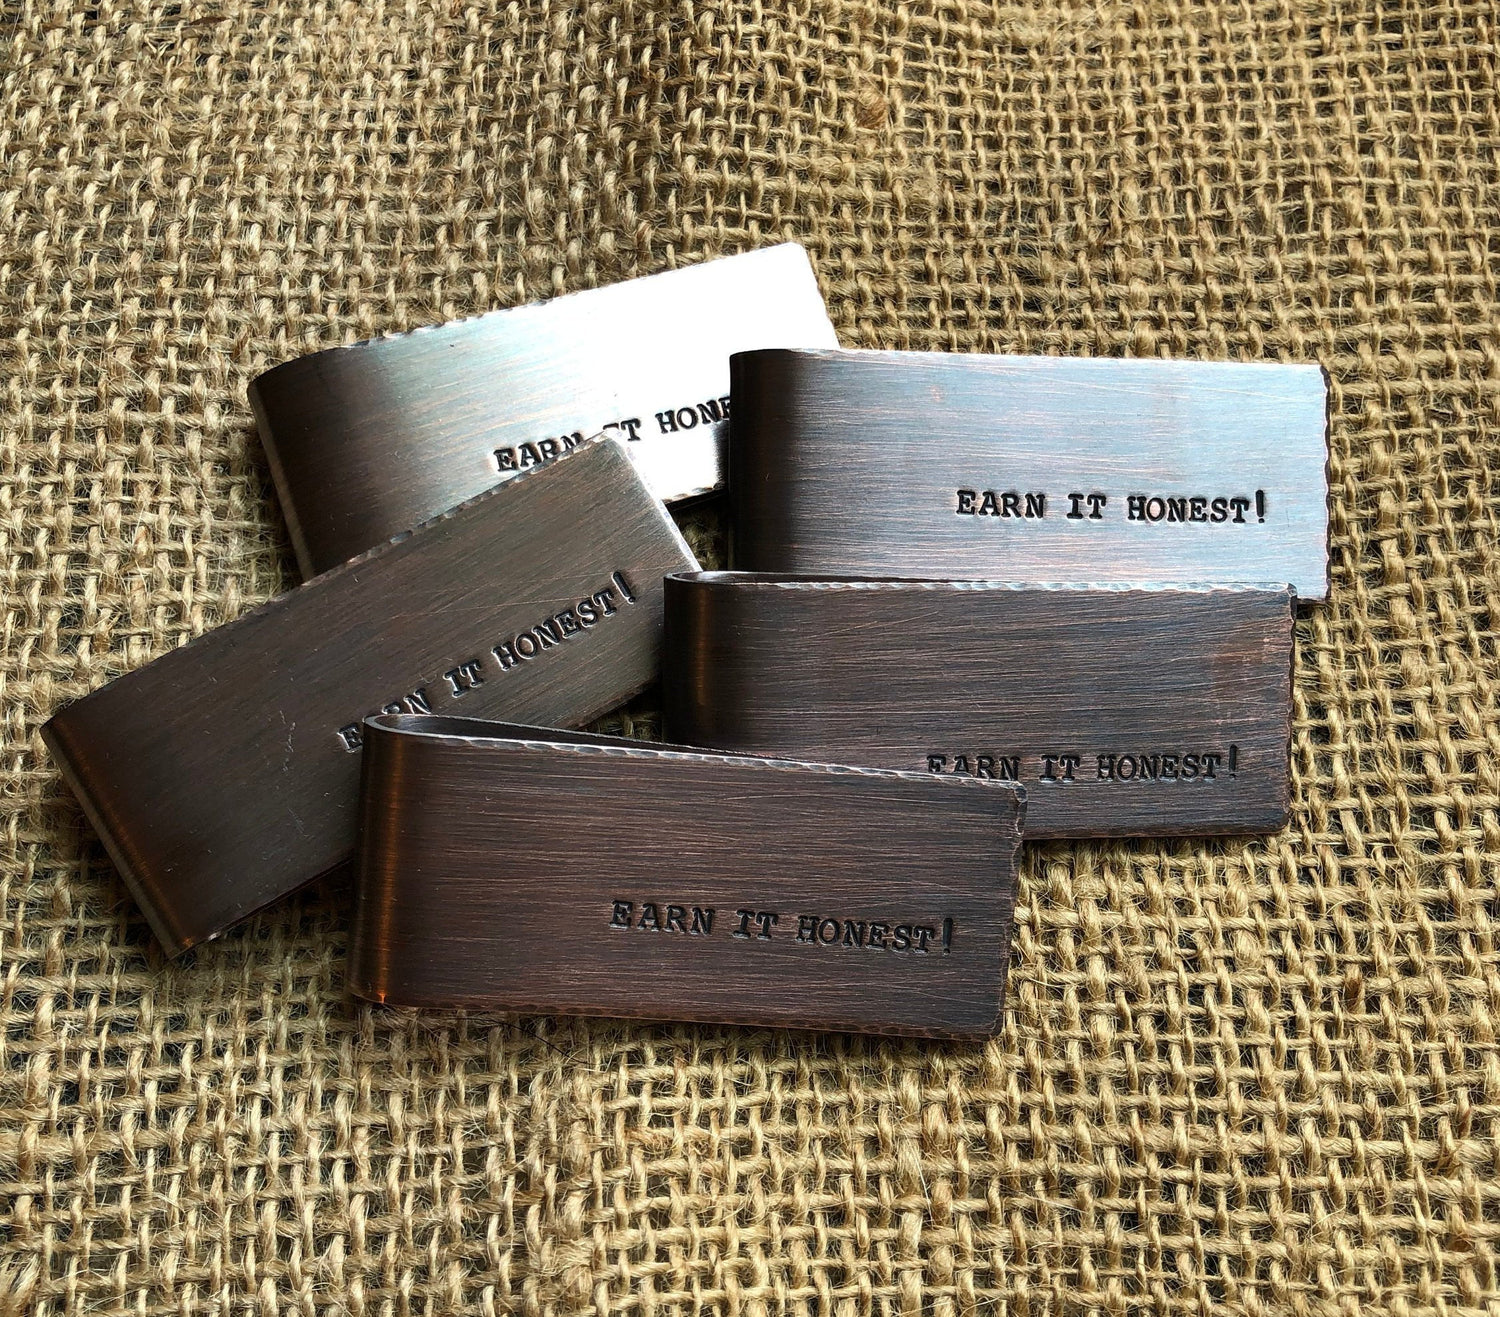 Custom Money Clips for Graduation - Gifts for the graduate - Personalized Money Clip - Hand Crafted Money Clip -Graduation Gift